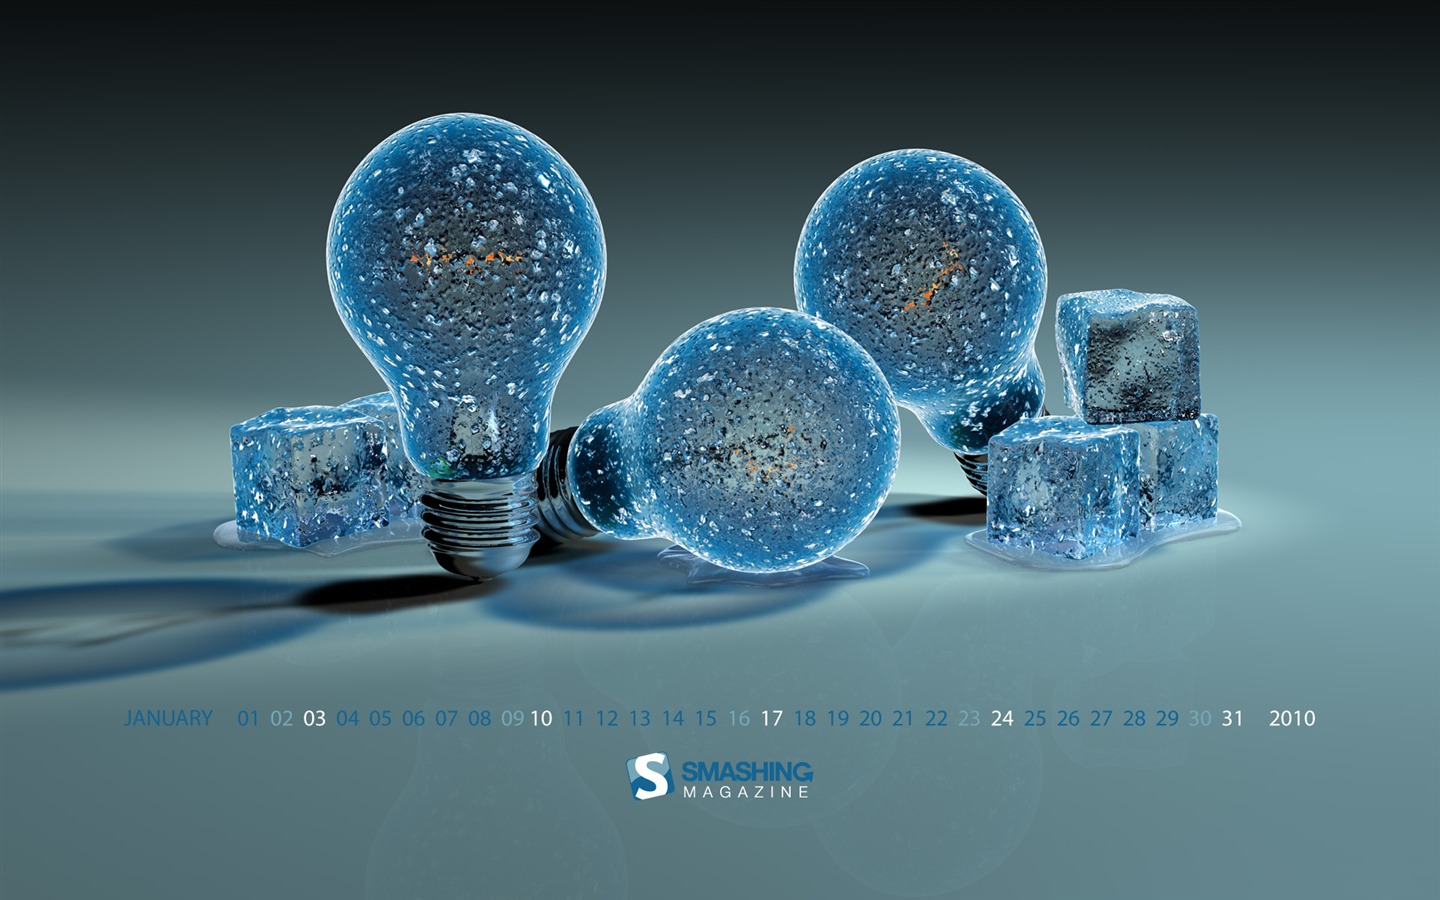 Microsoft Official Win7 Neujahr Wallpapers #6 - 1440x900